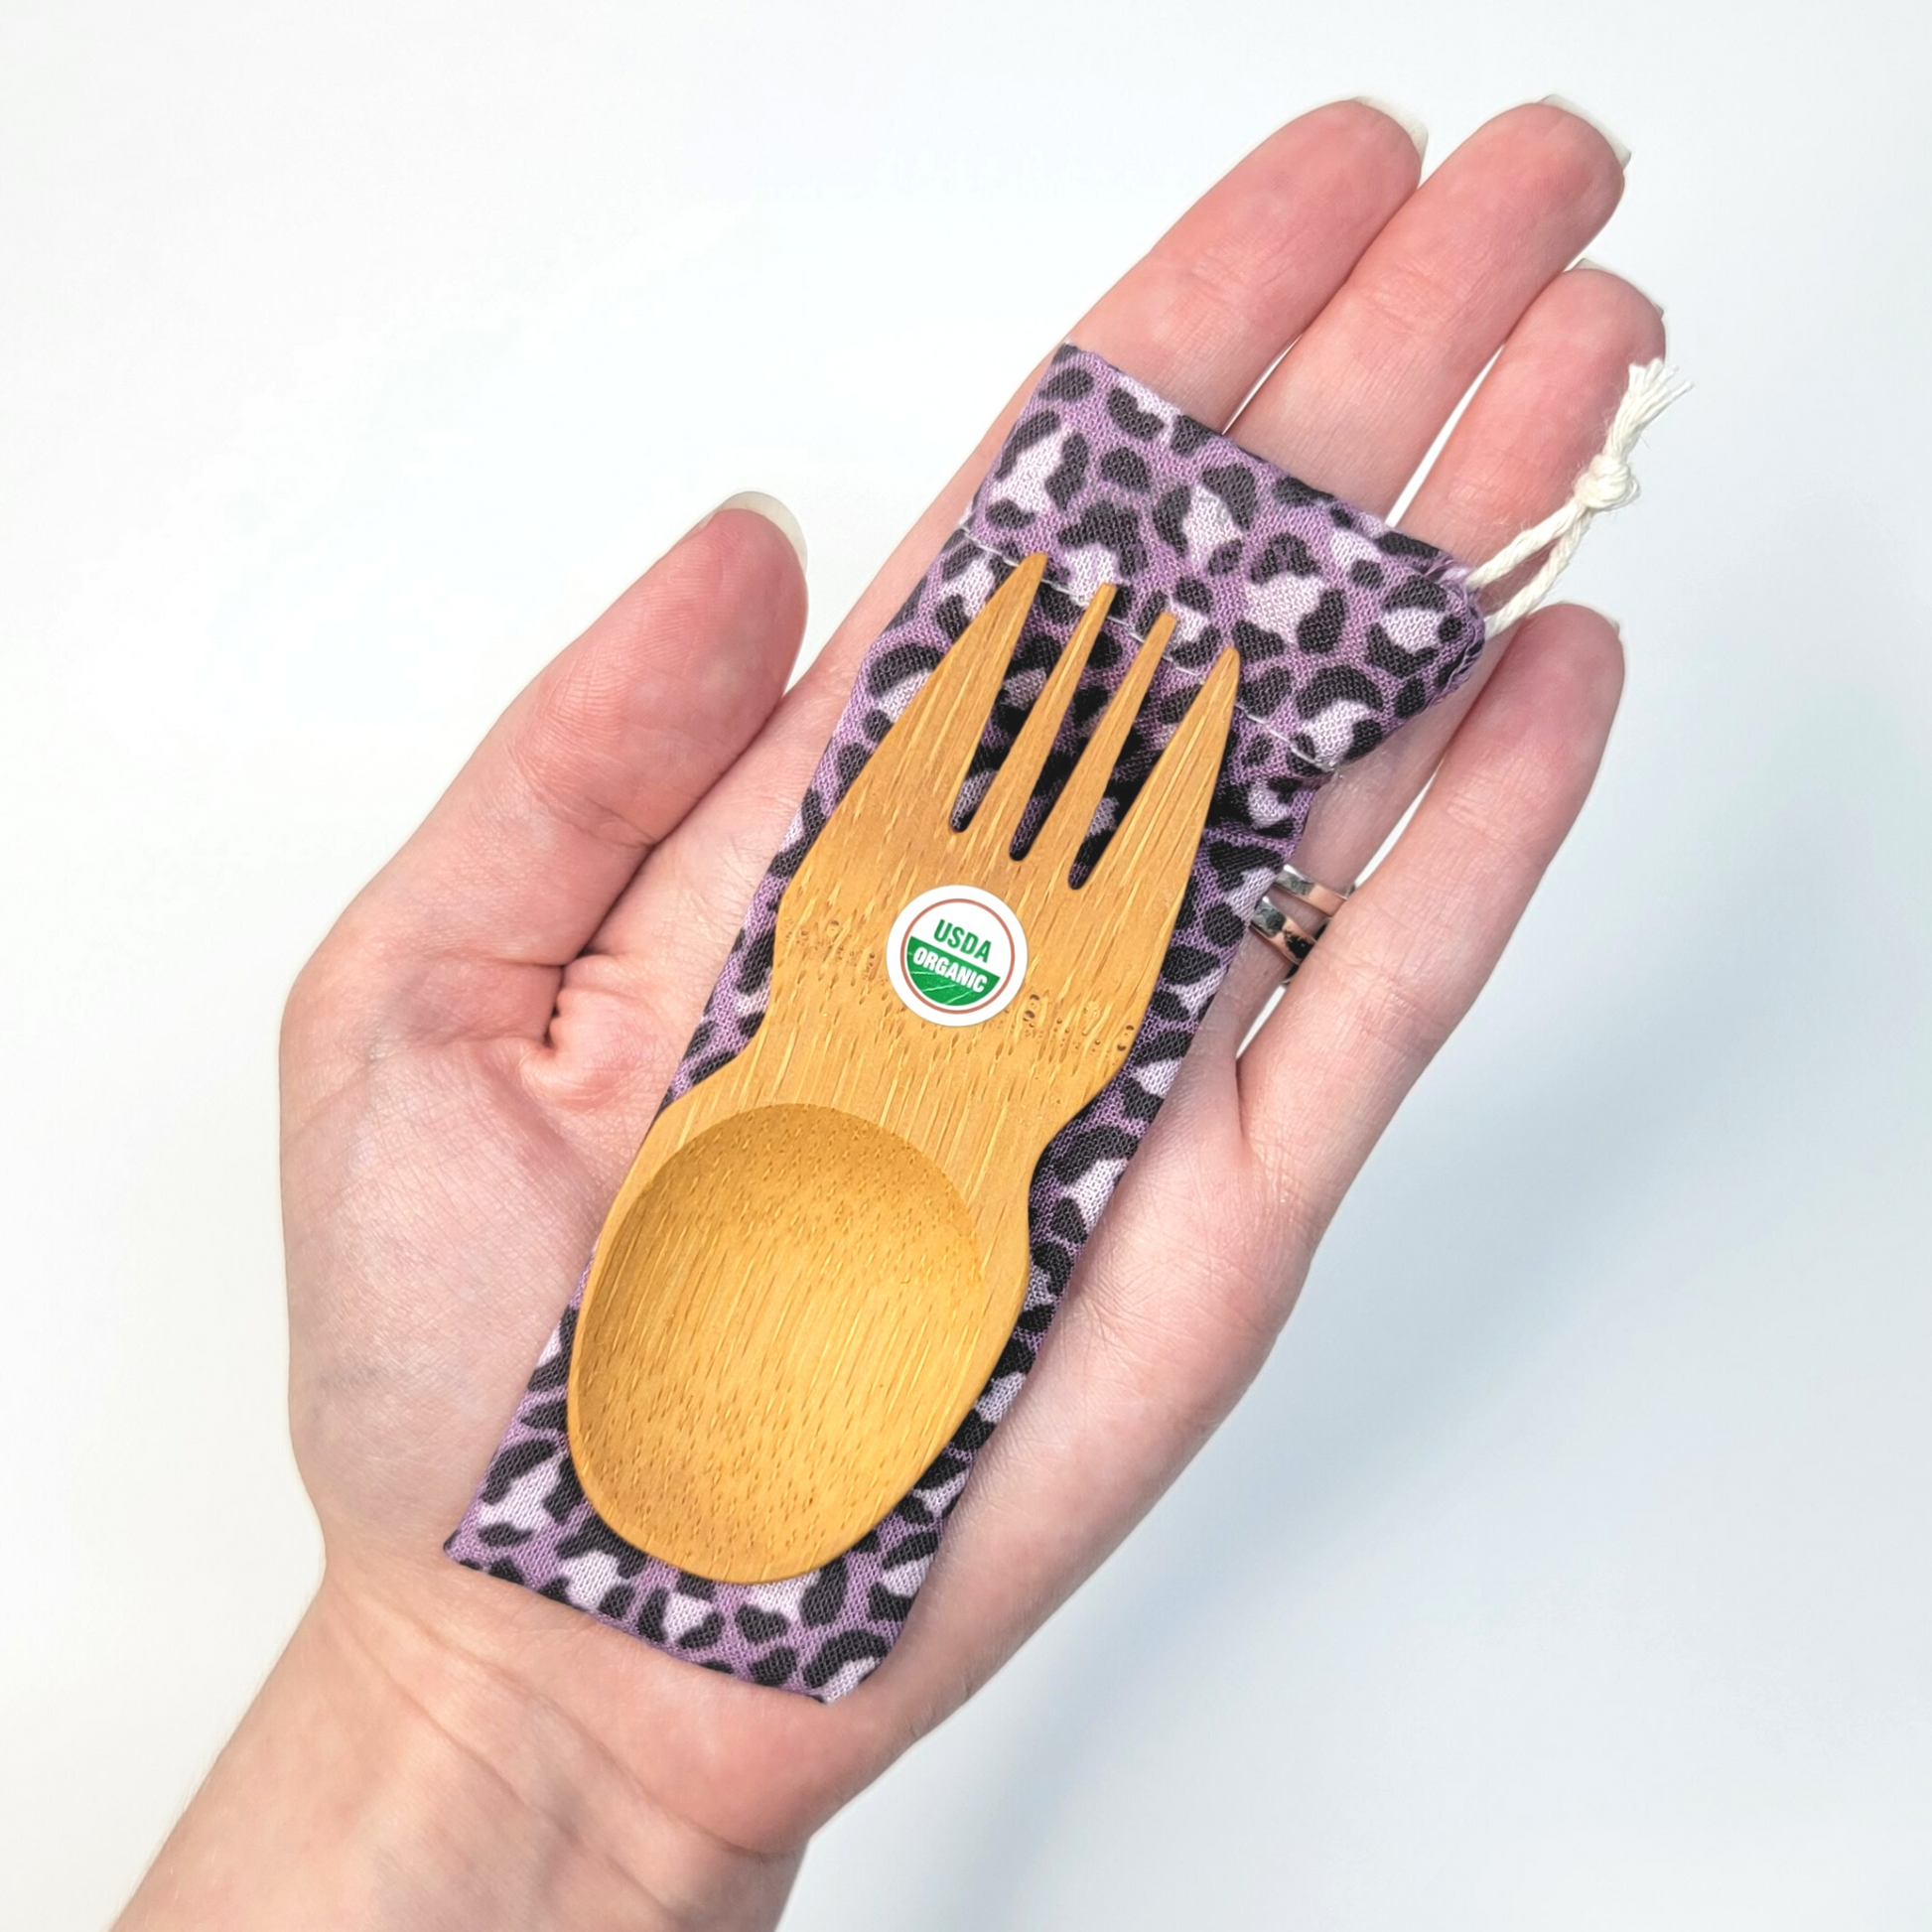 Violet leopard print fabric pouch with bamboo spork on top, laid on a hand for size reference. The spork is slightly longer than the fingers.